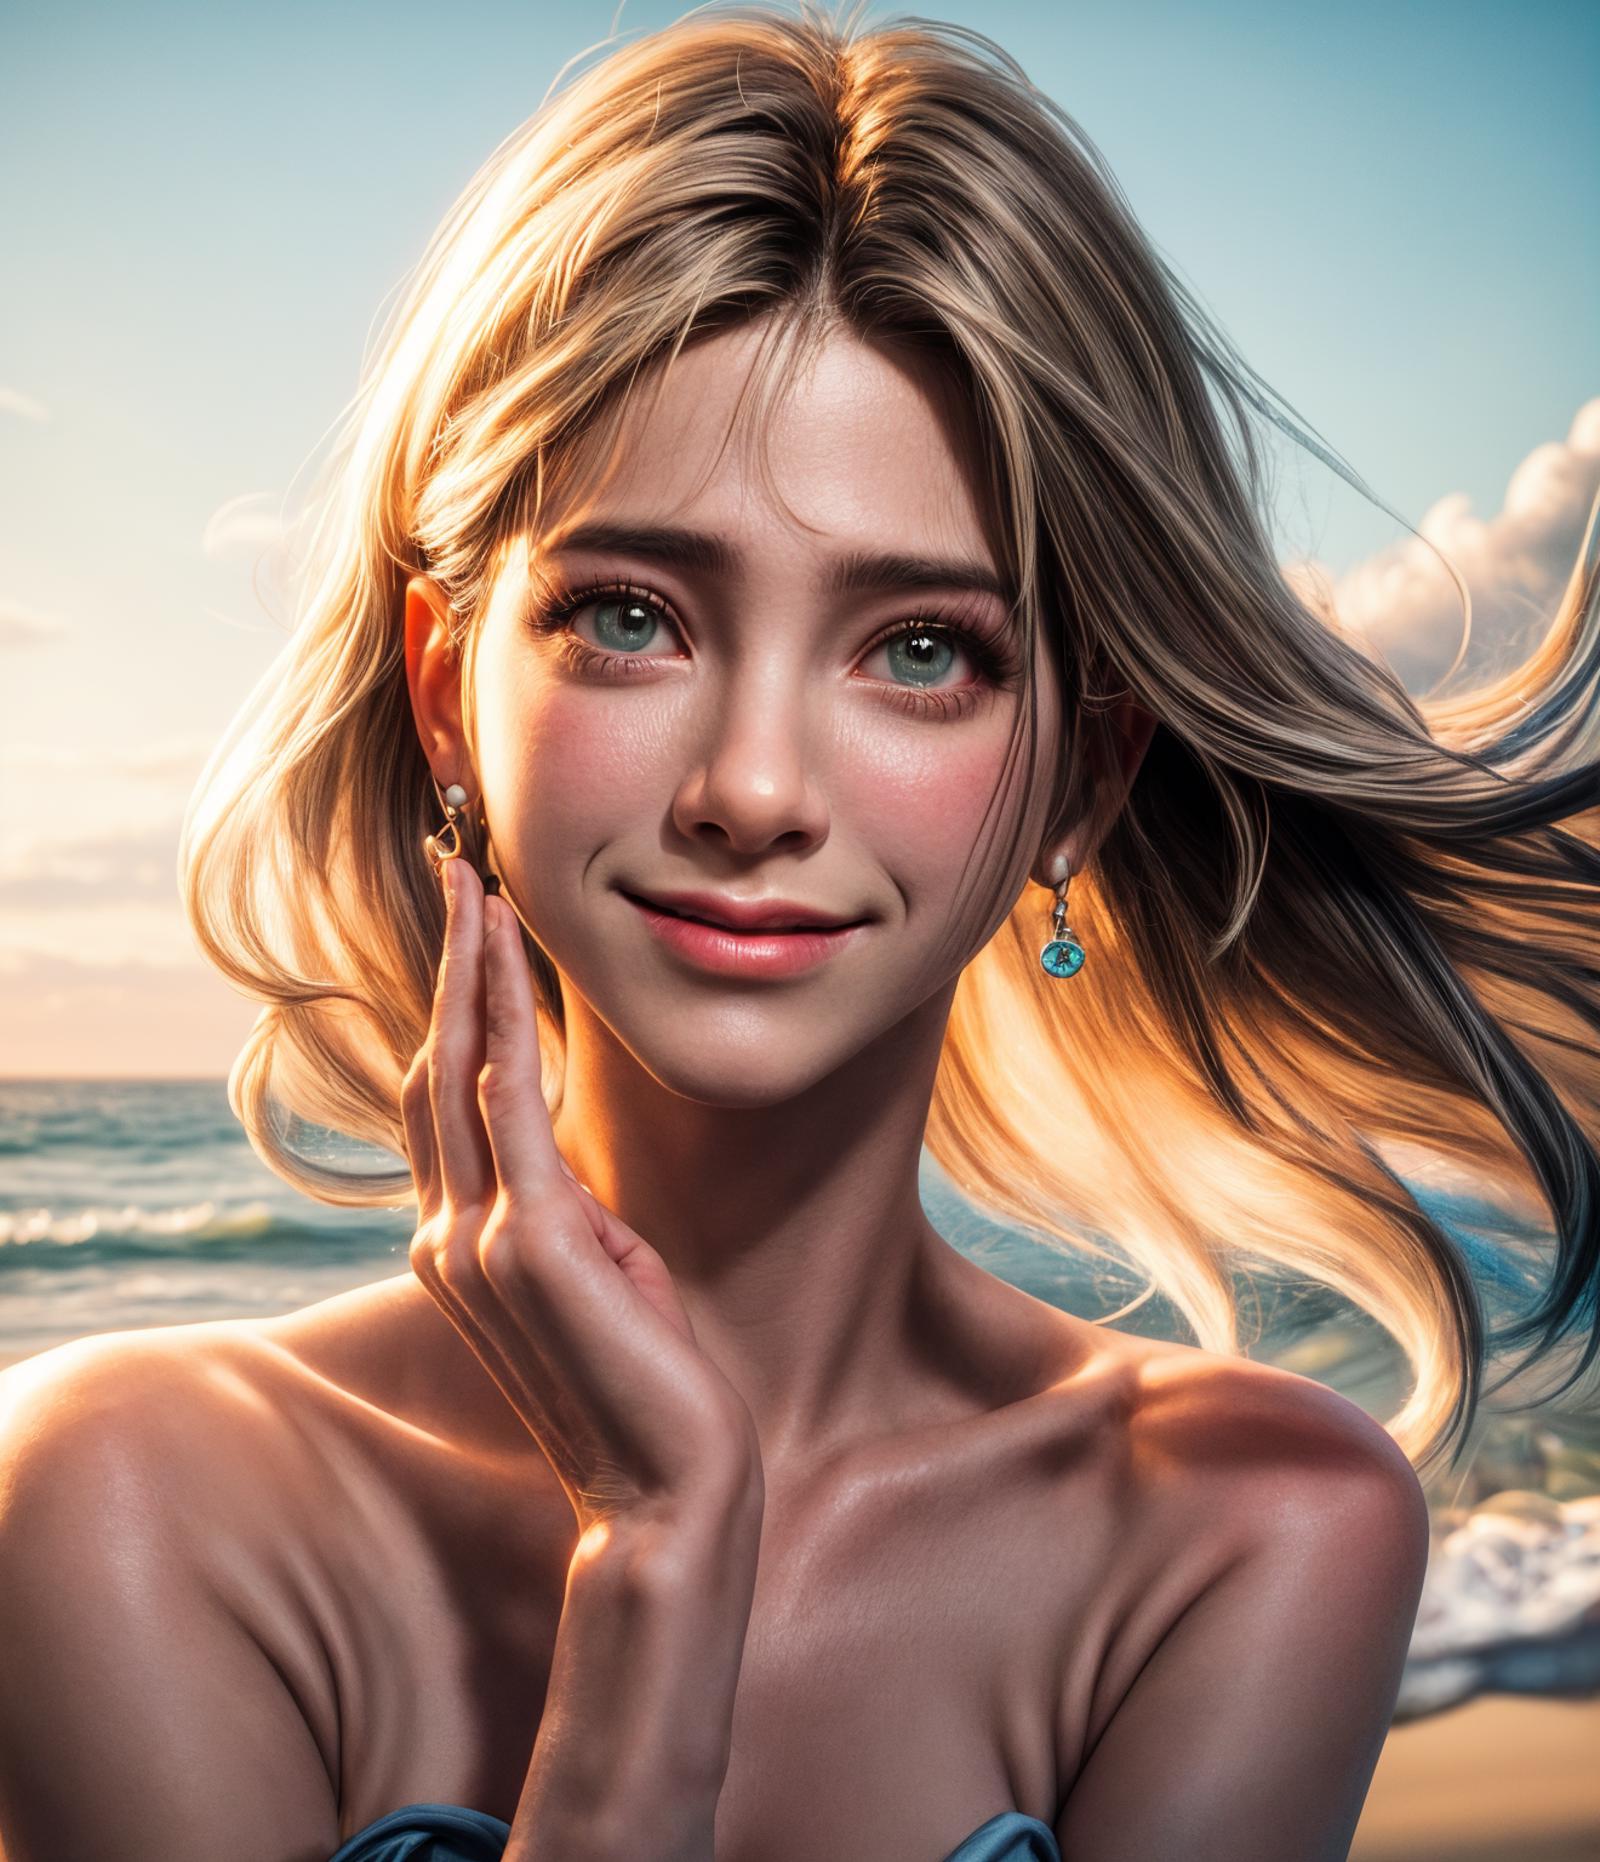 Artistic Illustration of a Blonde Woman with Blue Eyes and a Smile.